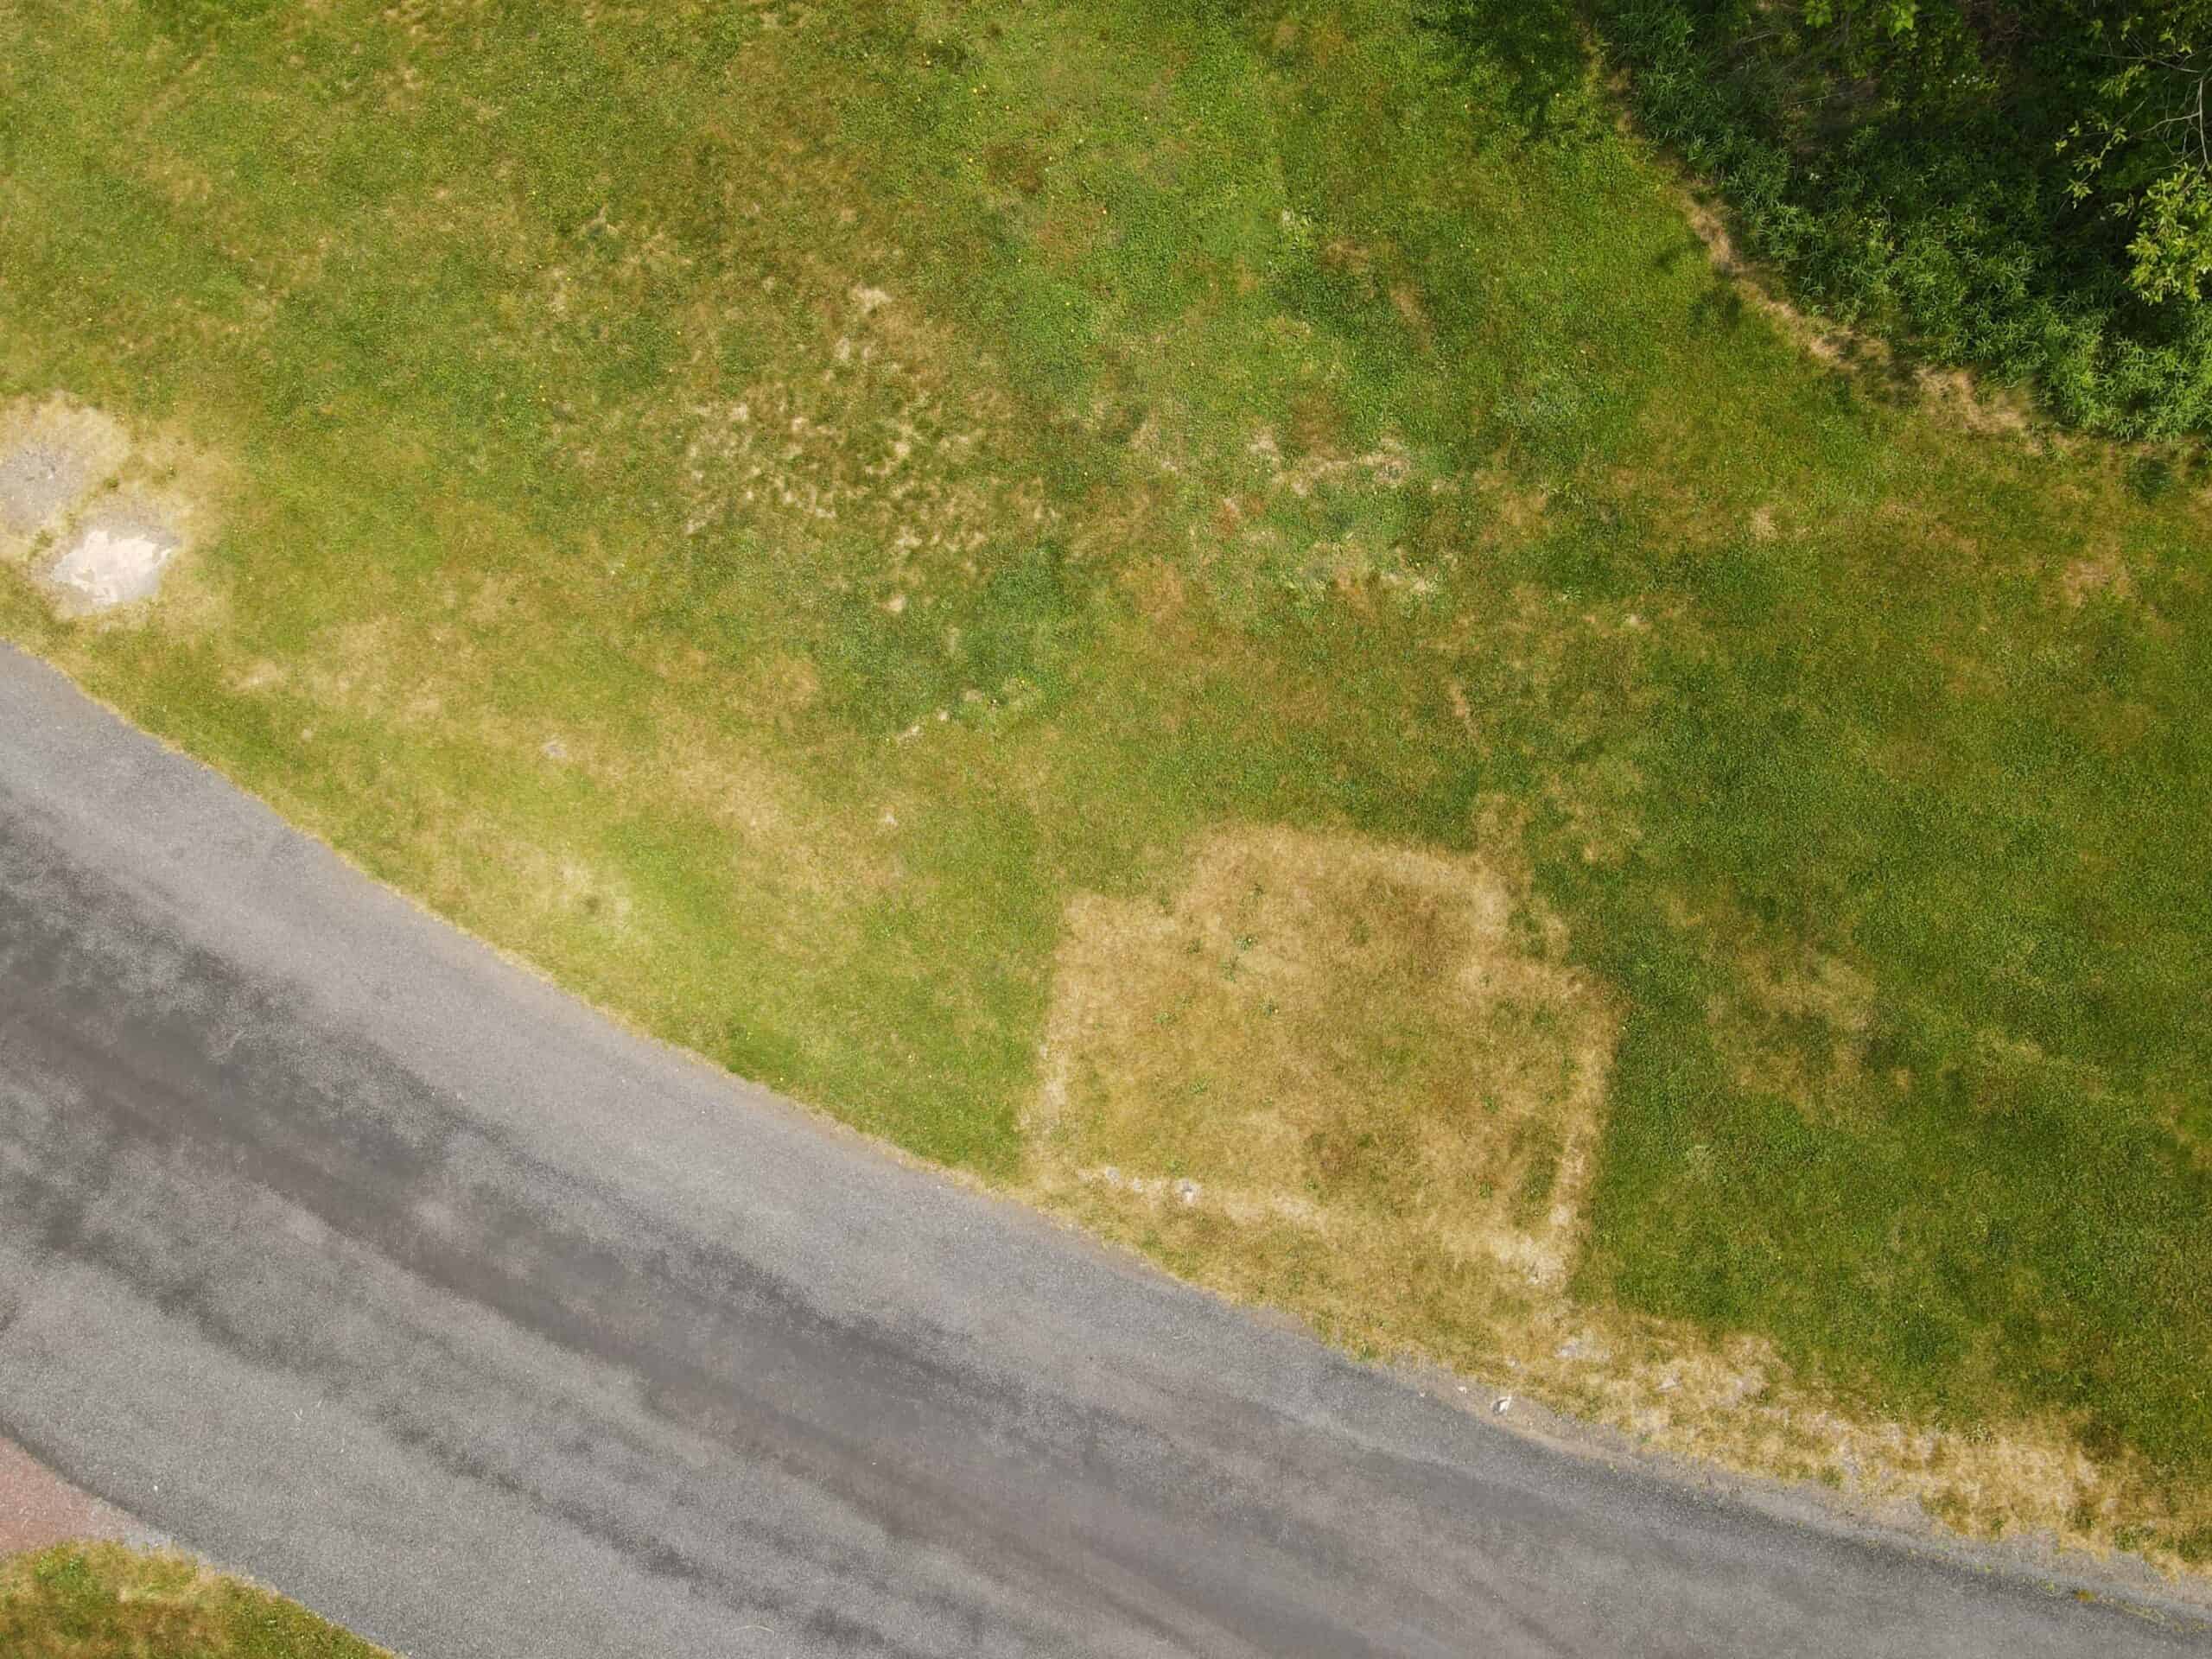 Aerial view of dry turf with outline of a building foundation in dormant grass